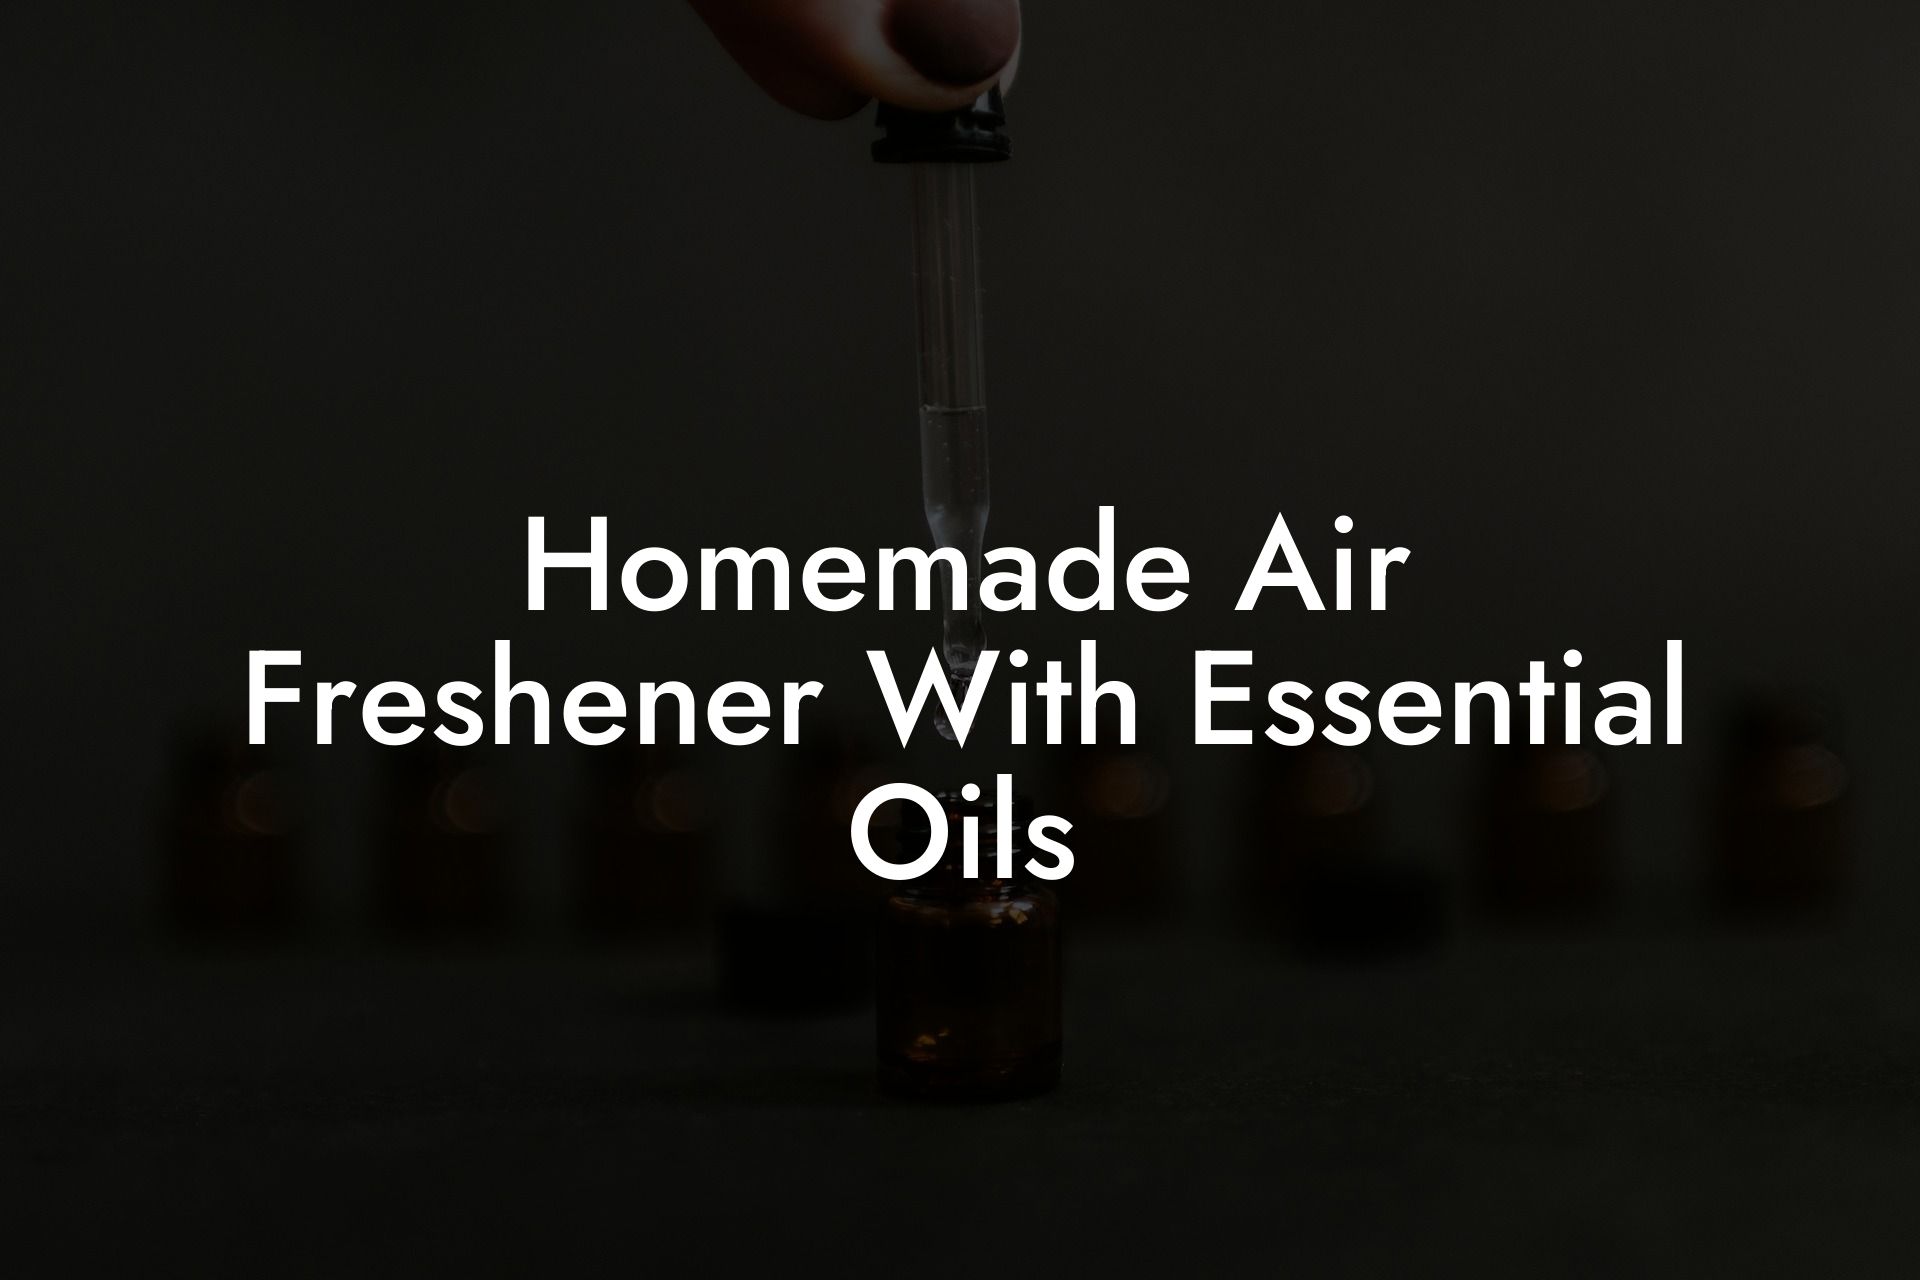 Homemade Air Freshener With Essential Oils